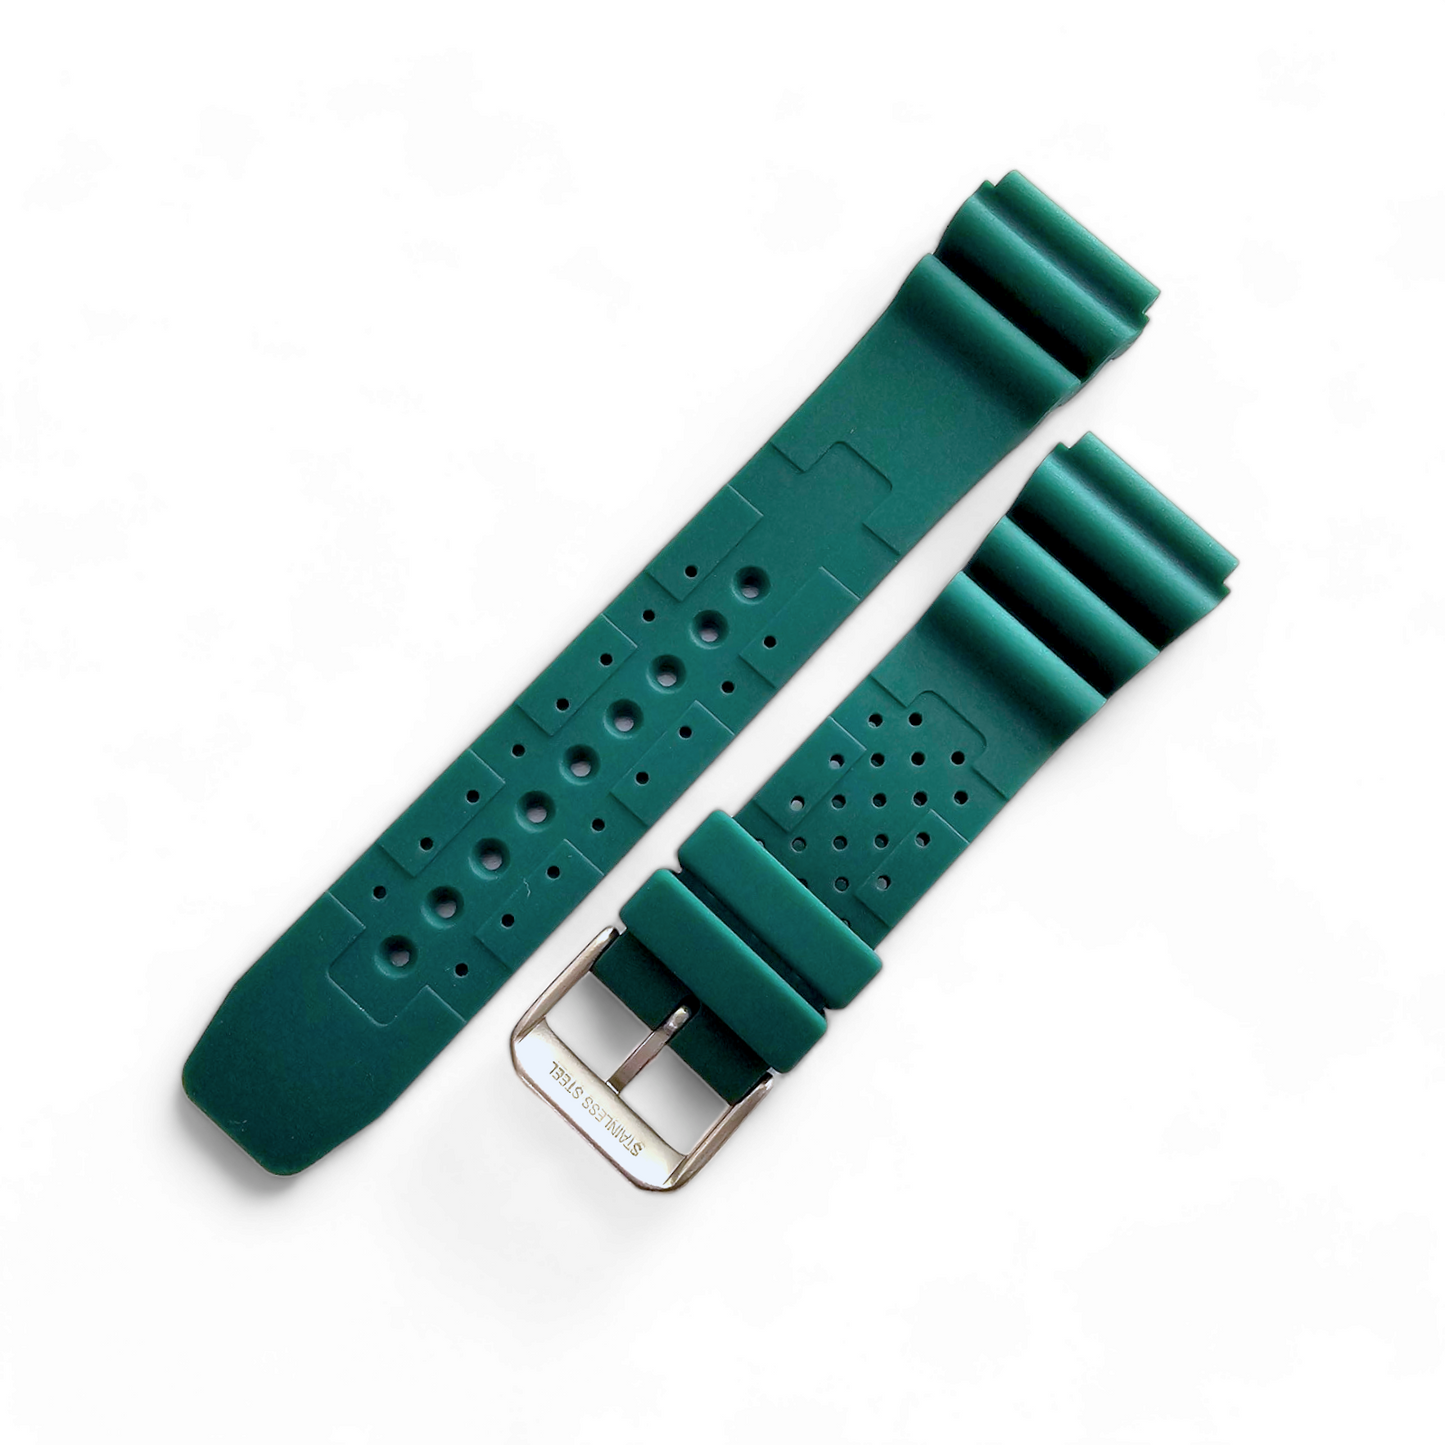 Premium Silicone Rubber ND Limits Divers Watch Strap Band 18mm 20mm 22mm 24mm Green